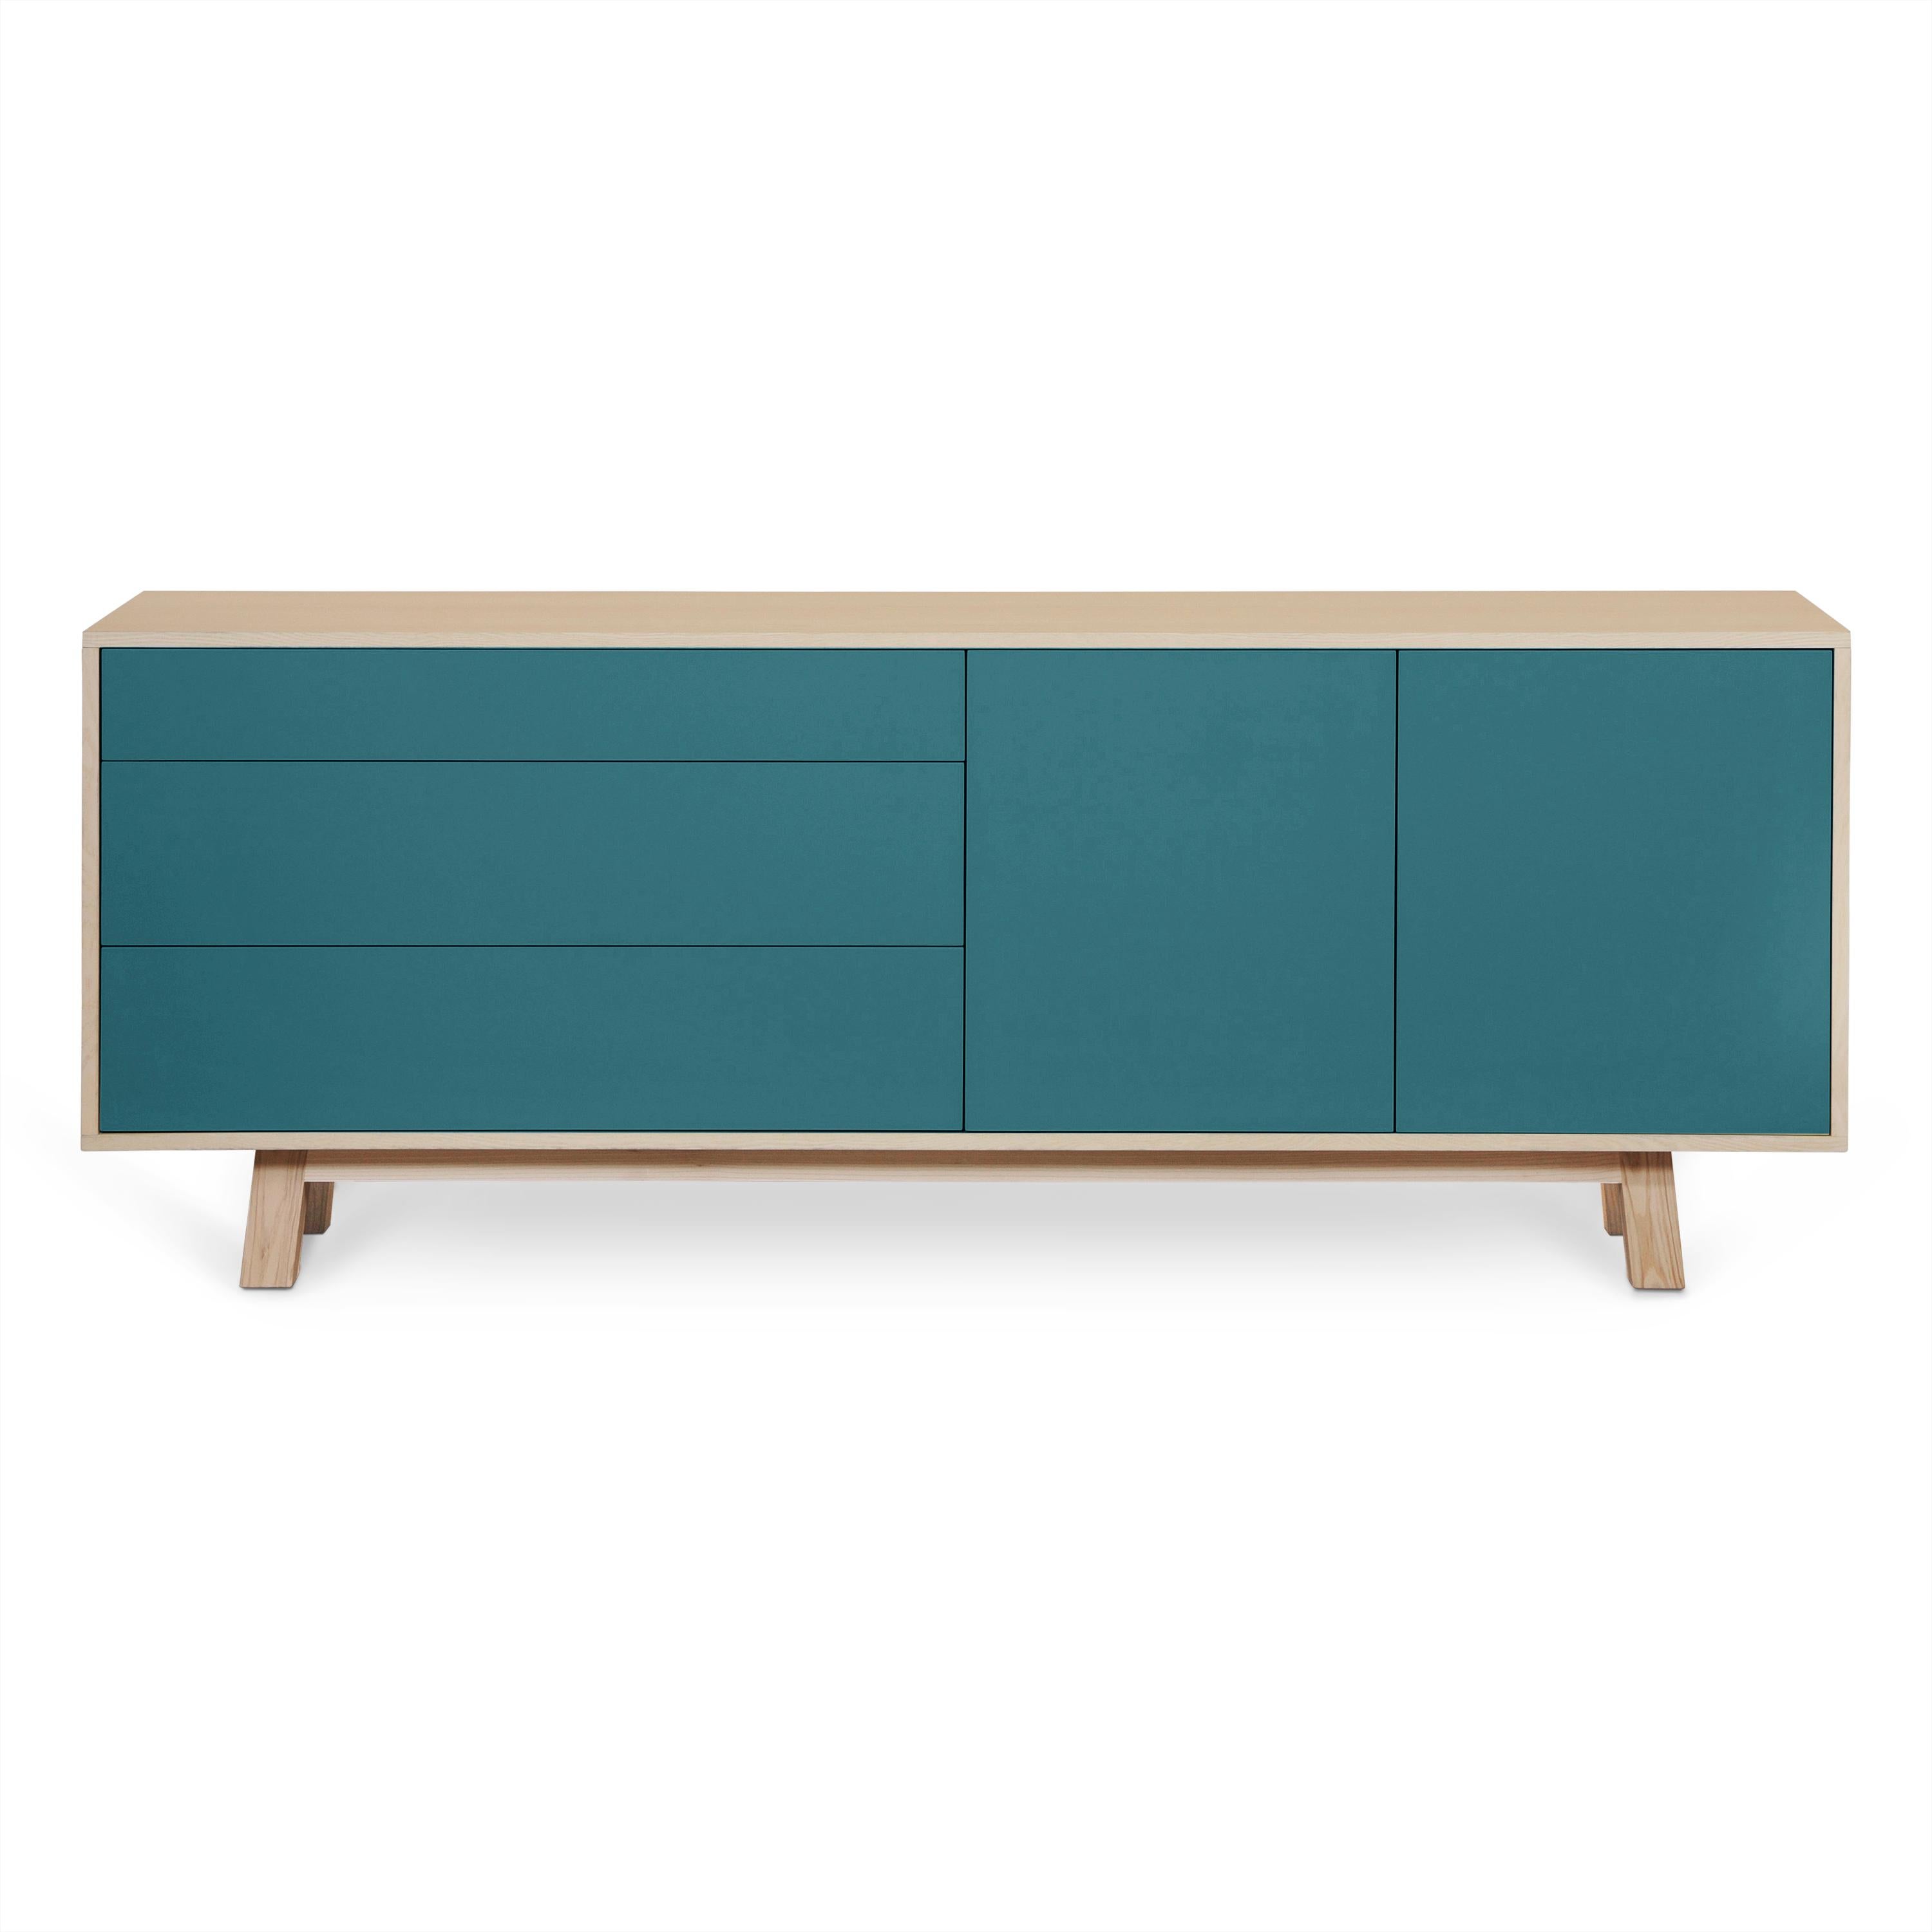 Sea Blue Sideboard, Scandinavian Design by Eric Gizard in Paris, French Craft For Sale 1